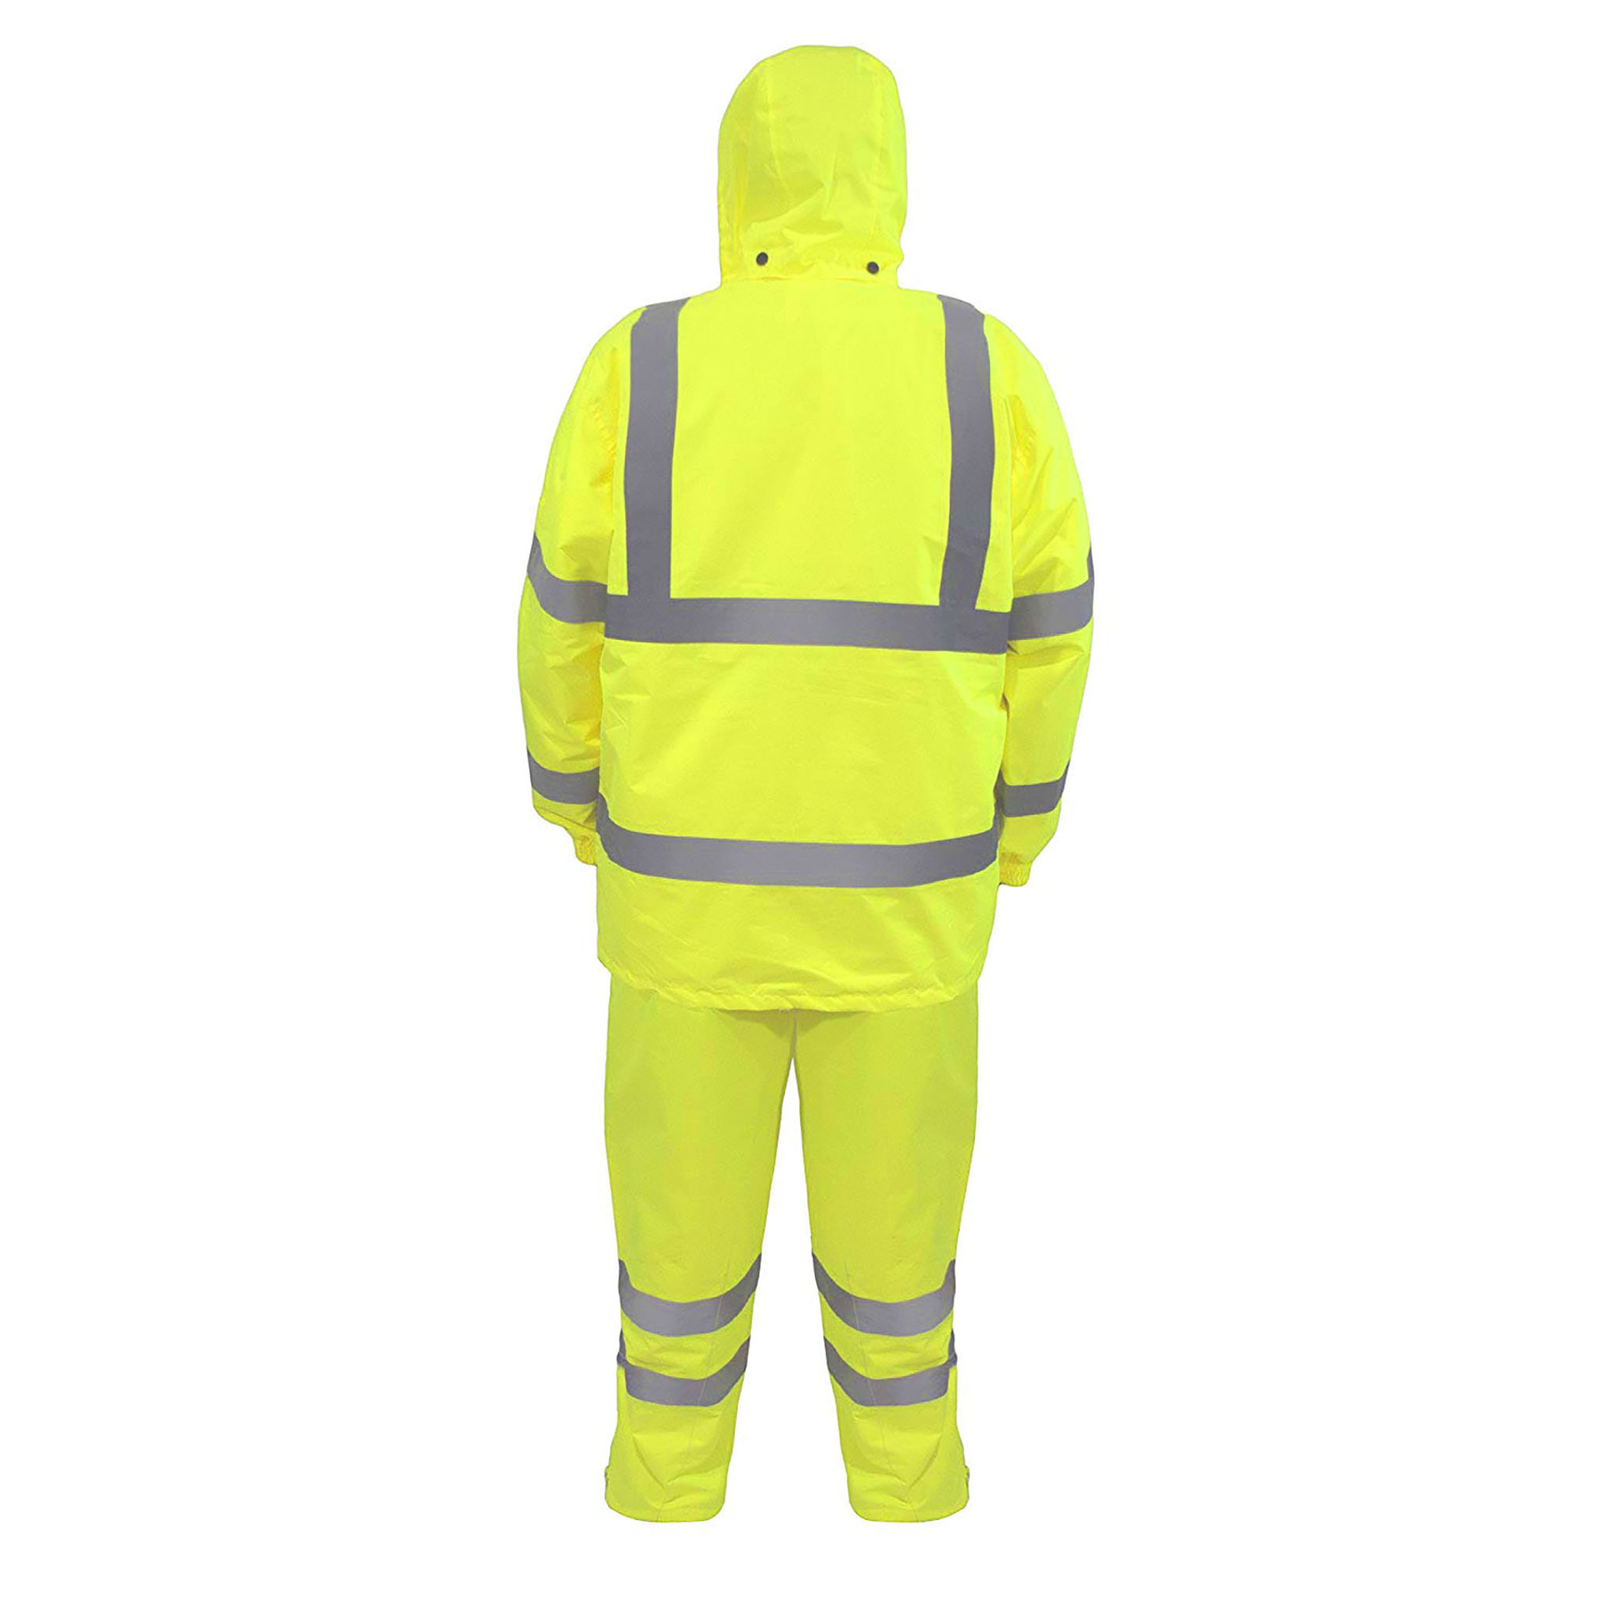 Image showing the back of the si vis yellow JORESTECH rain set with reflective tapes also on the back